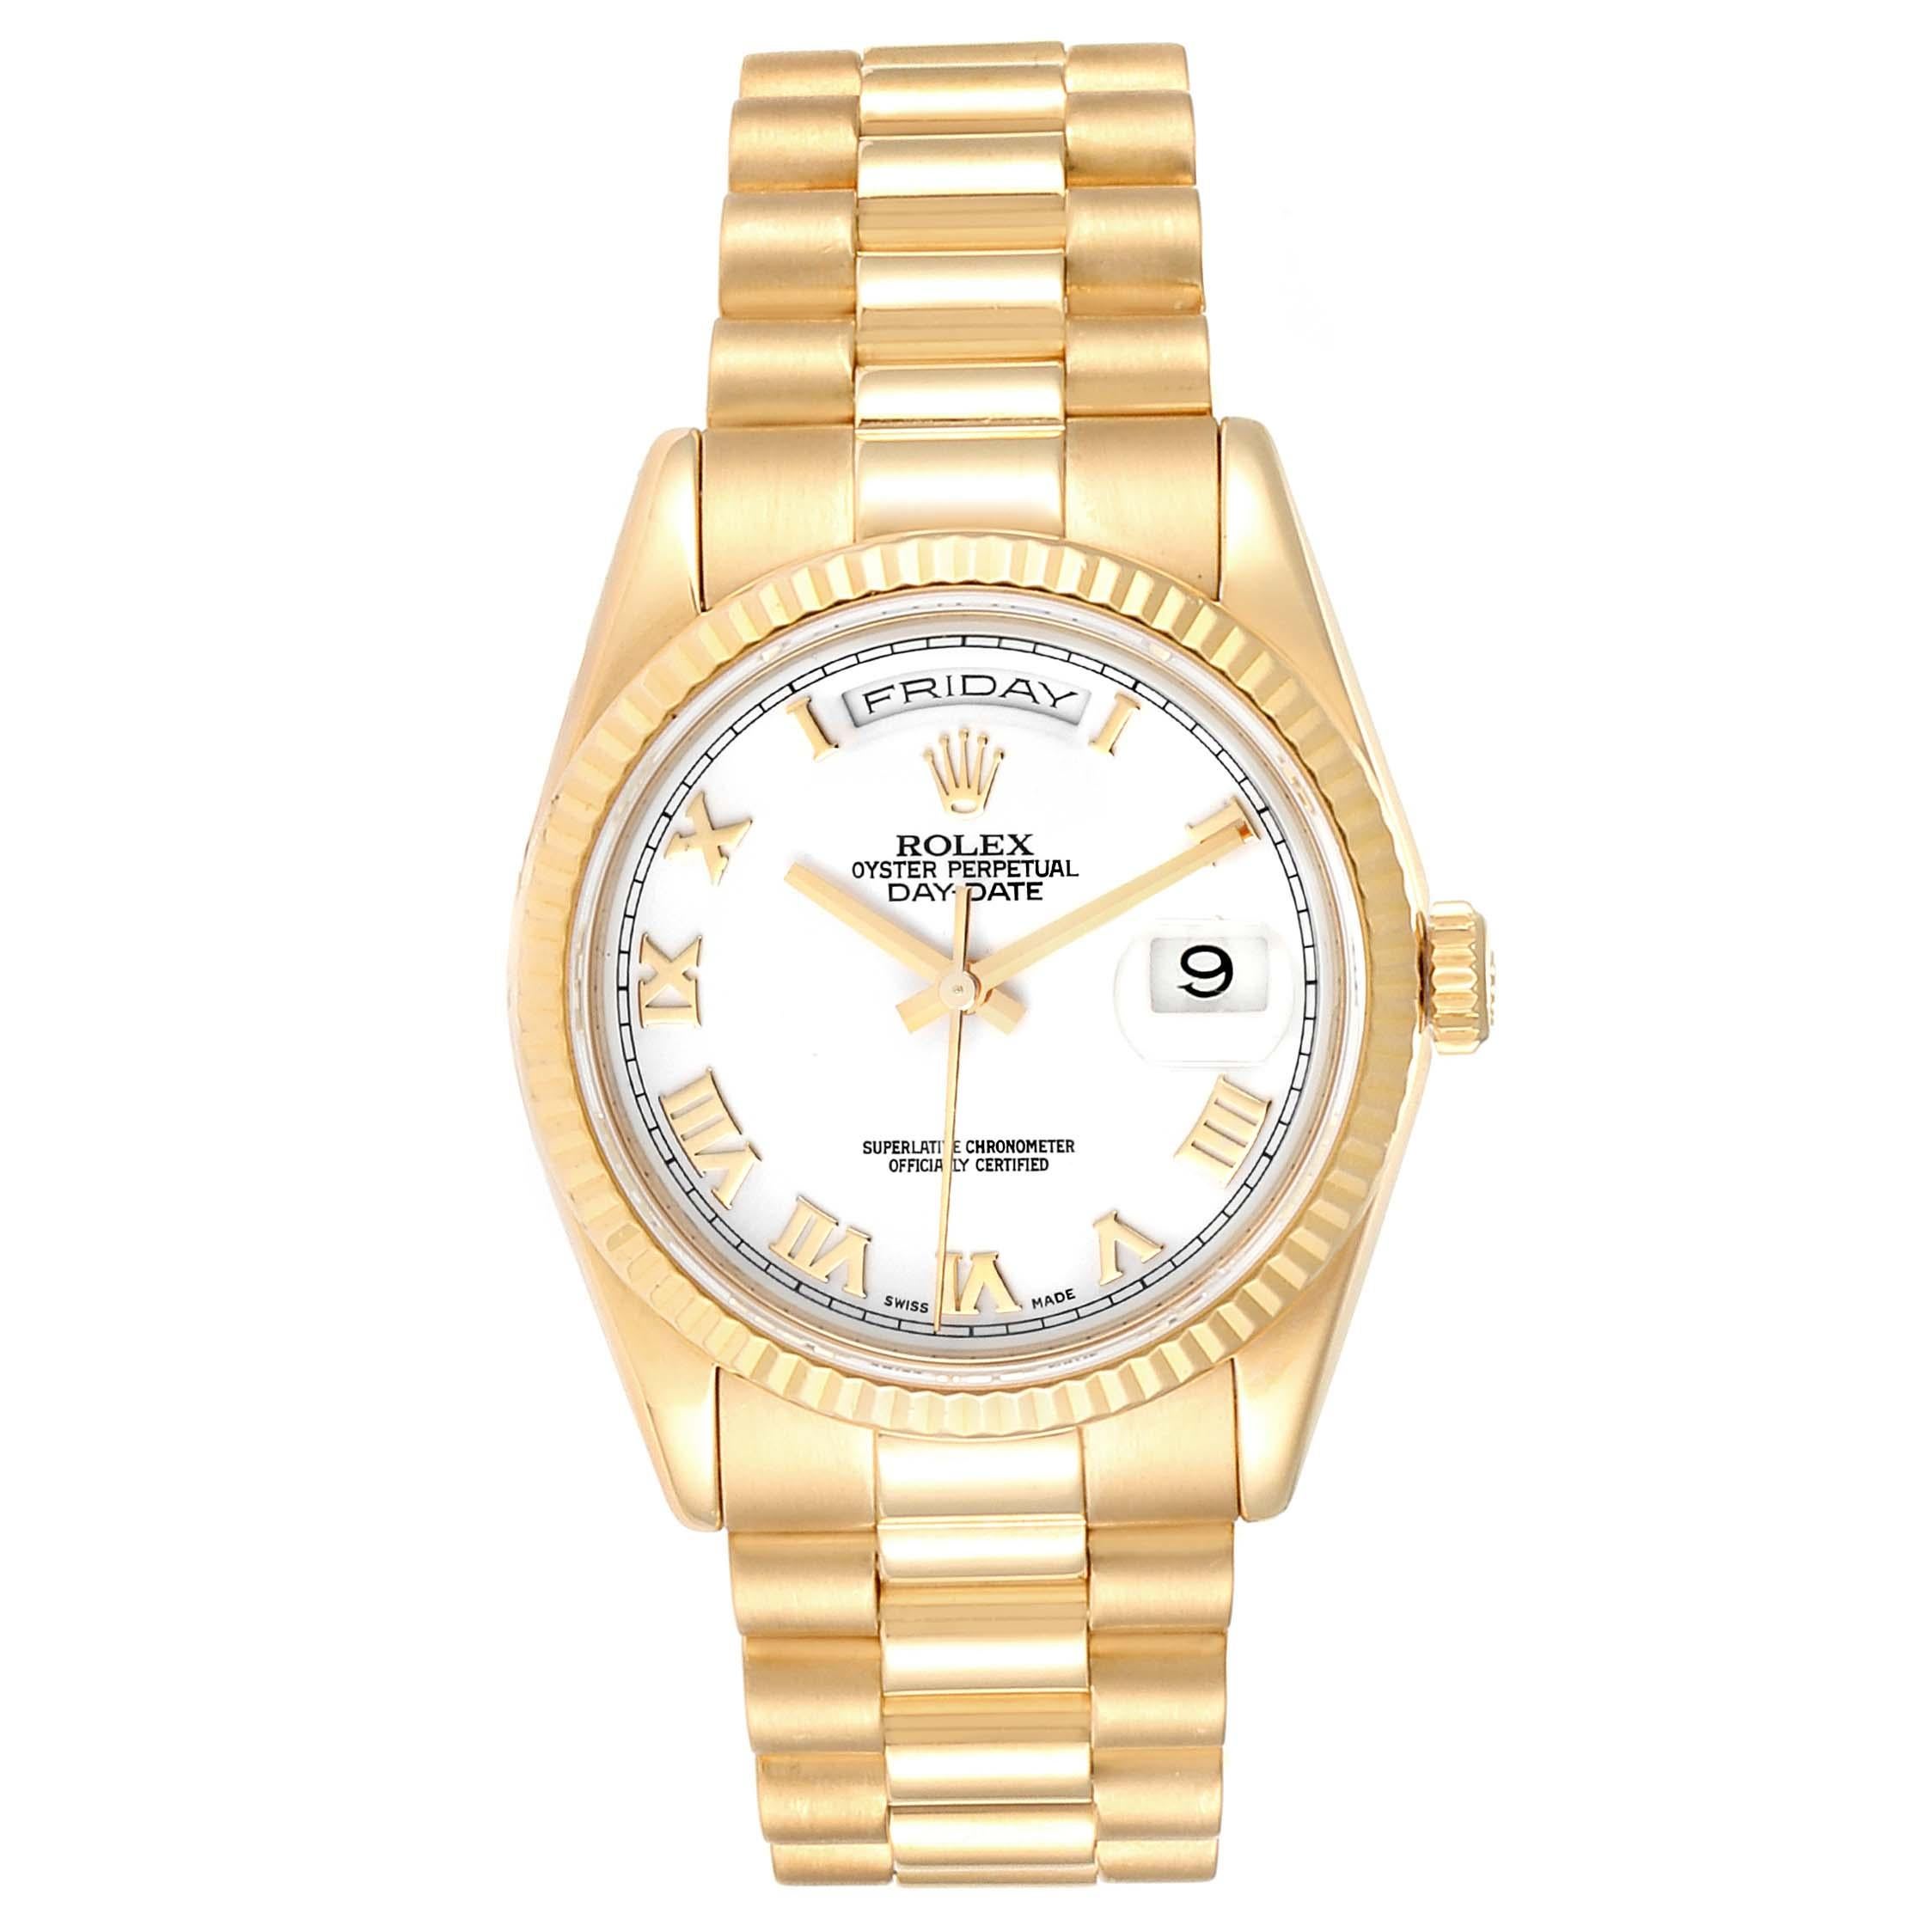 Rolex President Day Date 36 Yellow Gold White Dial Mens Watch 118238. Officially certified chronometer self-winding movement. 18k yellow gold oyster case 36.0 mm in diameter. Rolex logo on a crown. 18K yellow gold fluted bezel. Scratch resistant